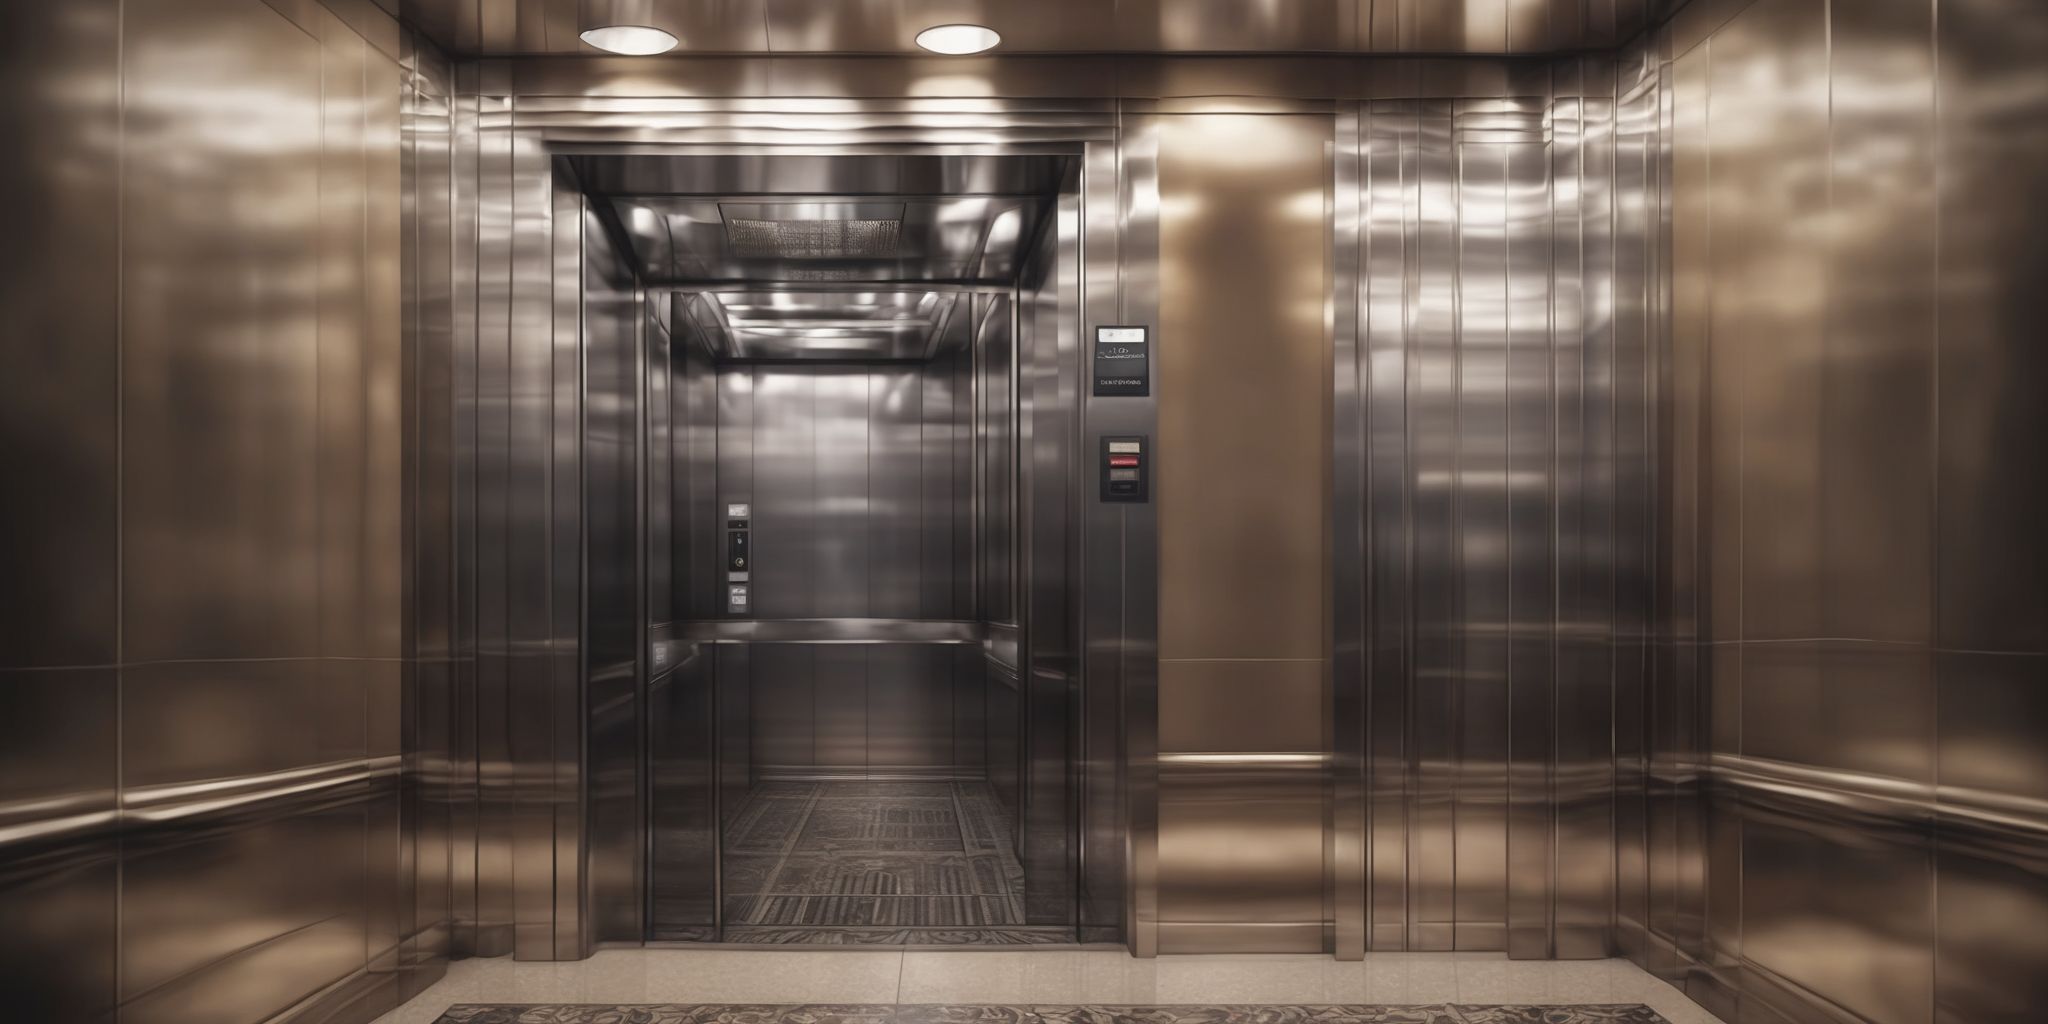 Elevator  in realistic, photographic style